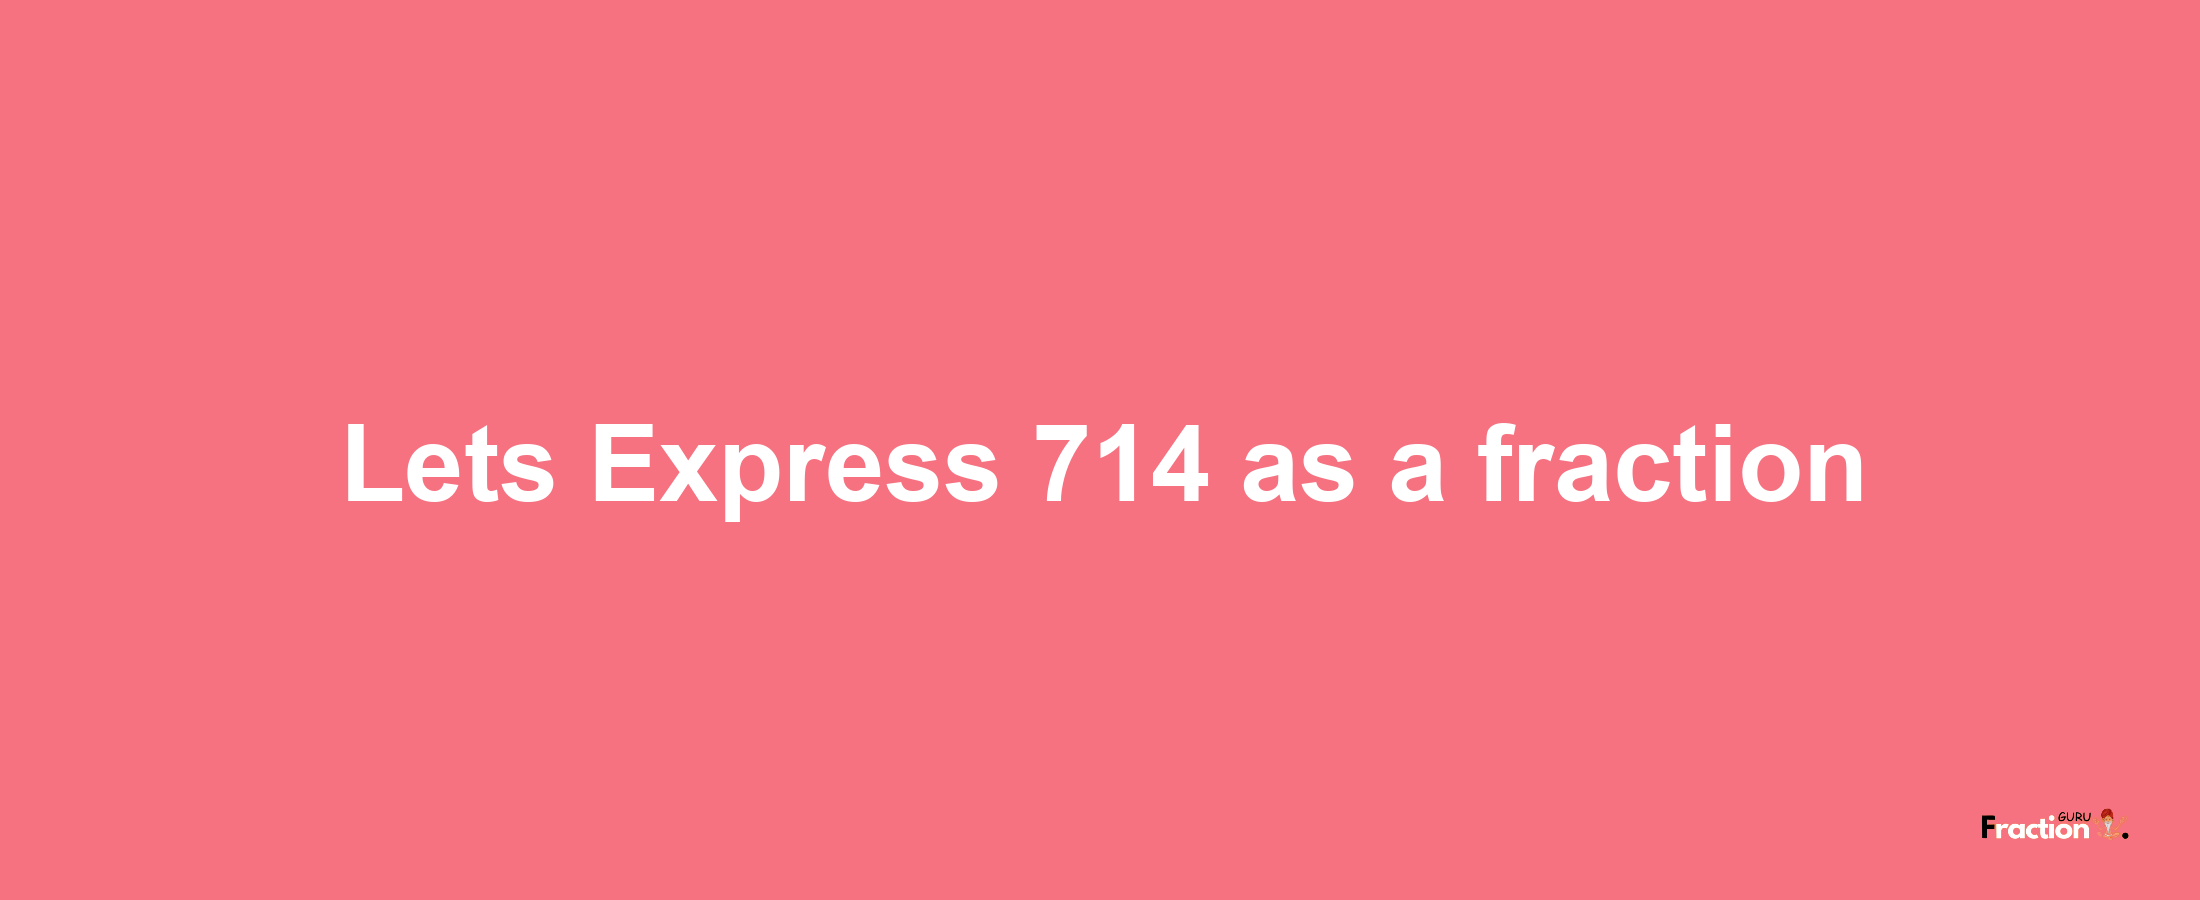 Lets Express 714 as afraction